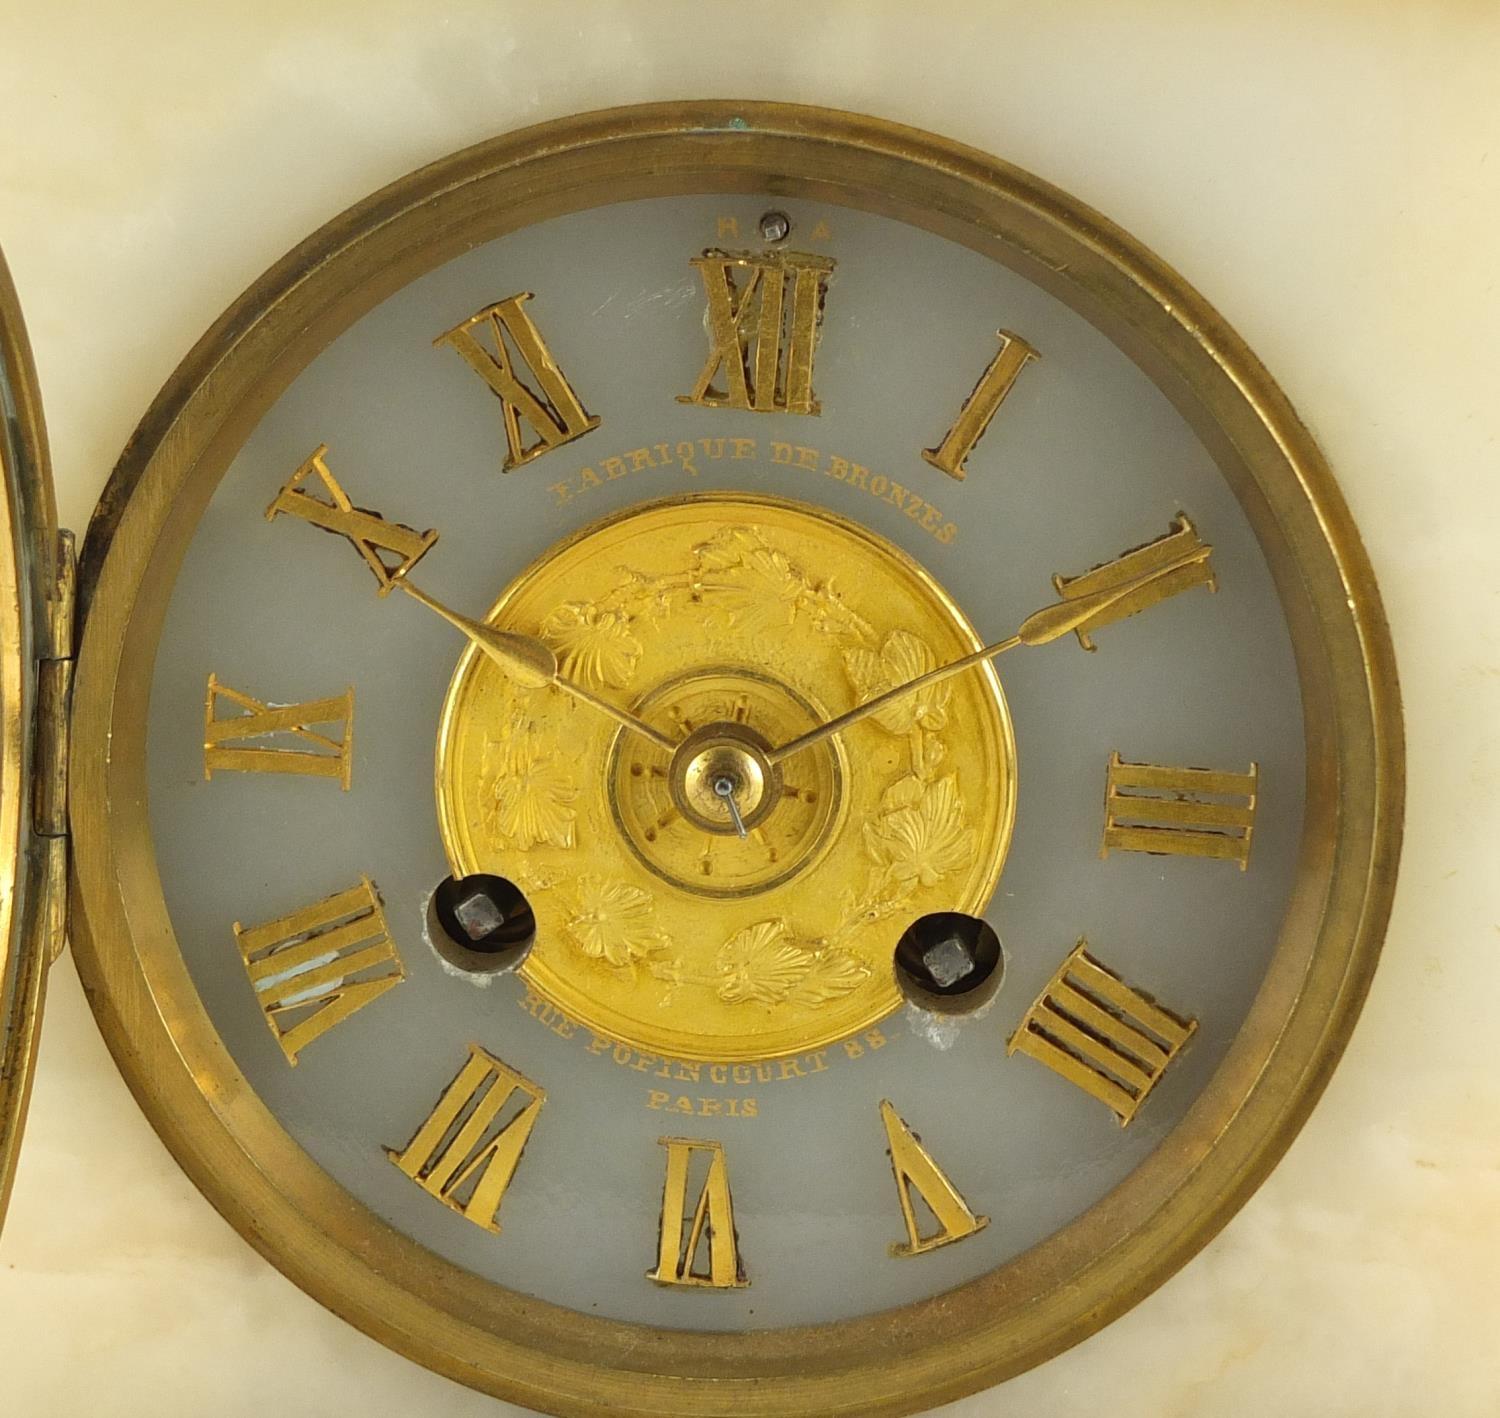 French Bordier onyx striking mantel clock with brass mounts, the dial with Roman numerals marked - Image 4 of 7